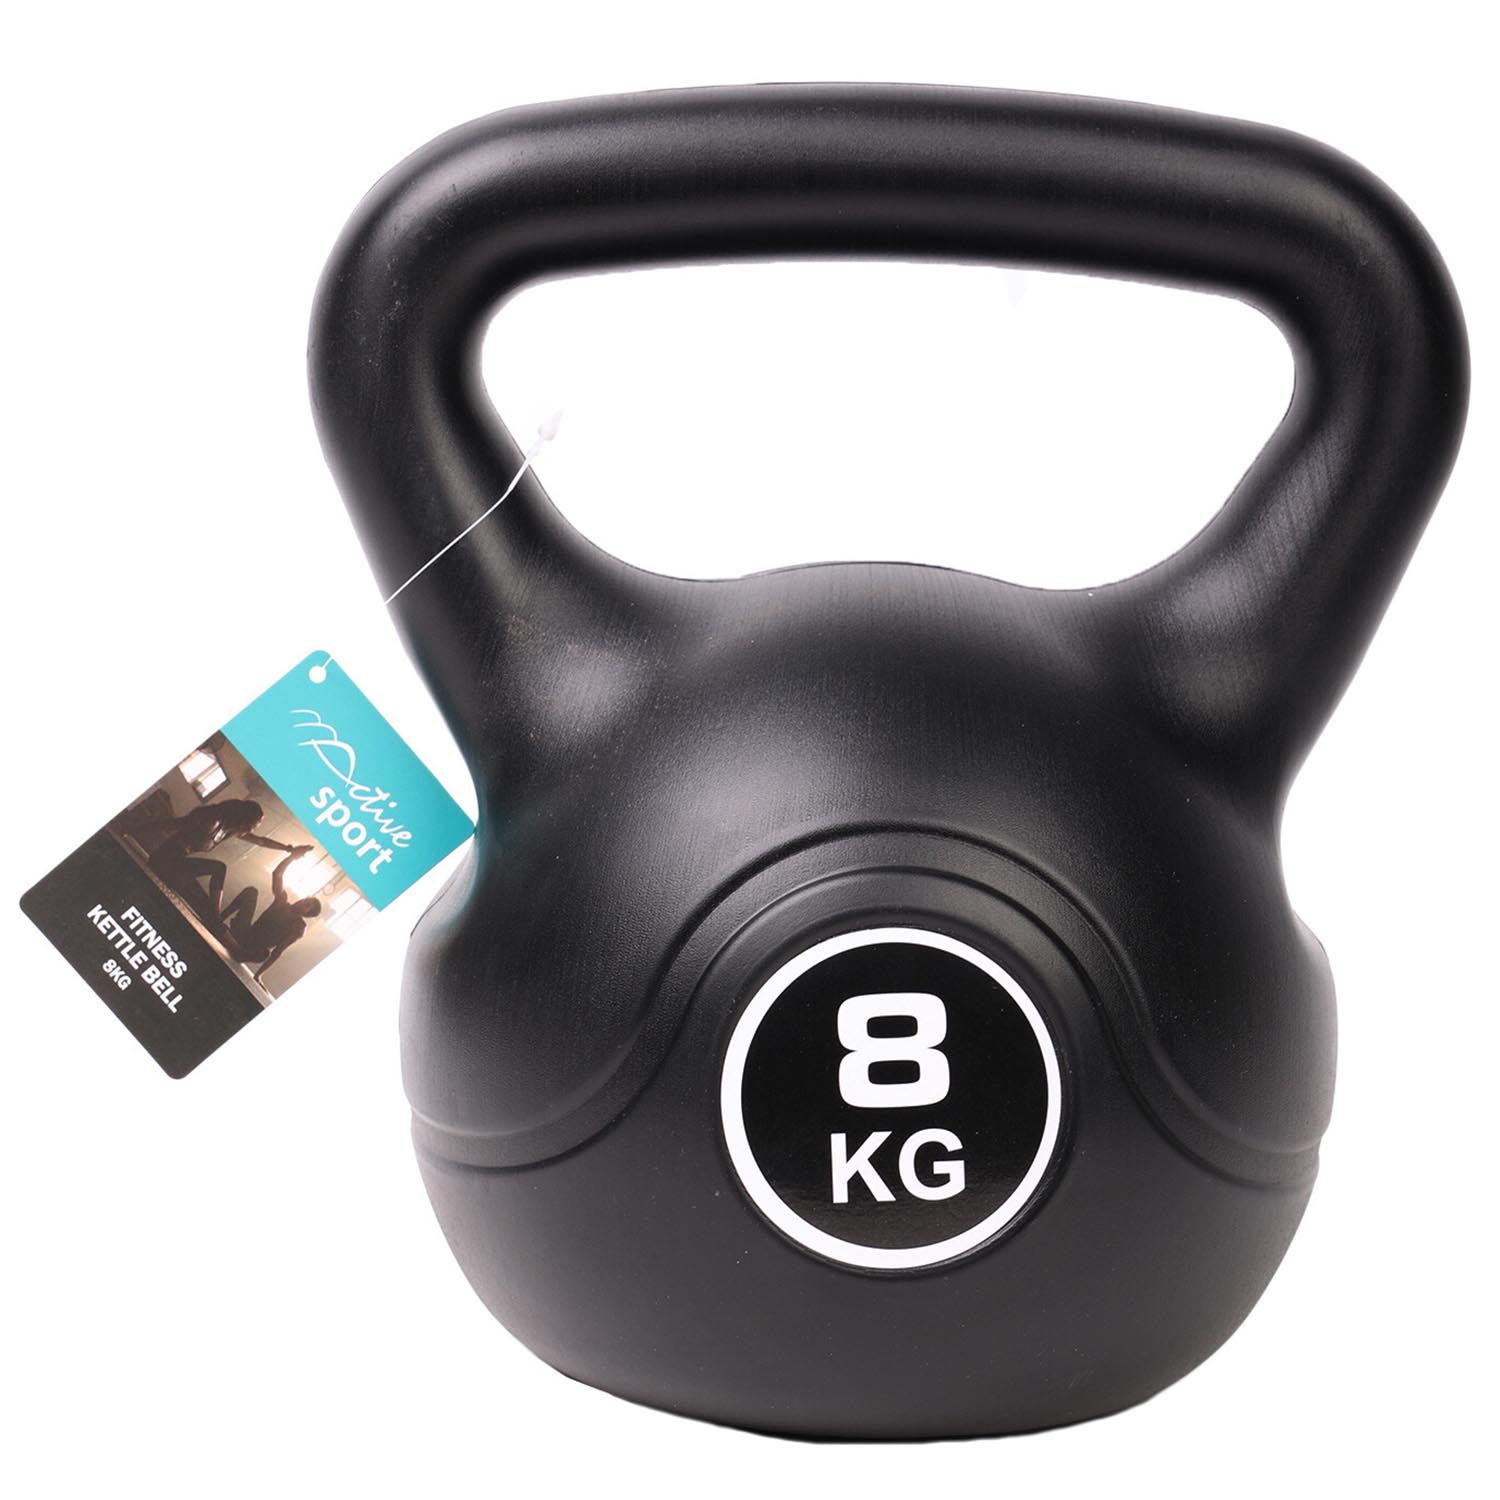 Active Sport Black Fitness KettleBell Weight 8kg Image